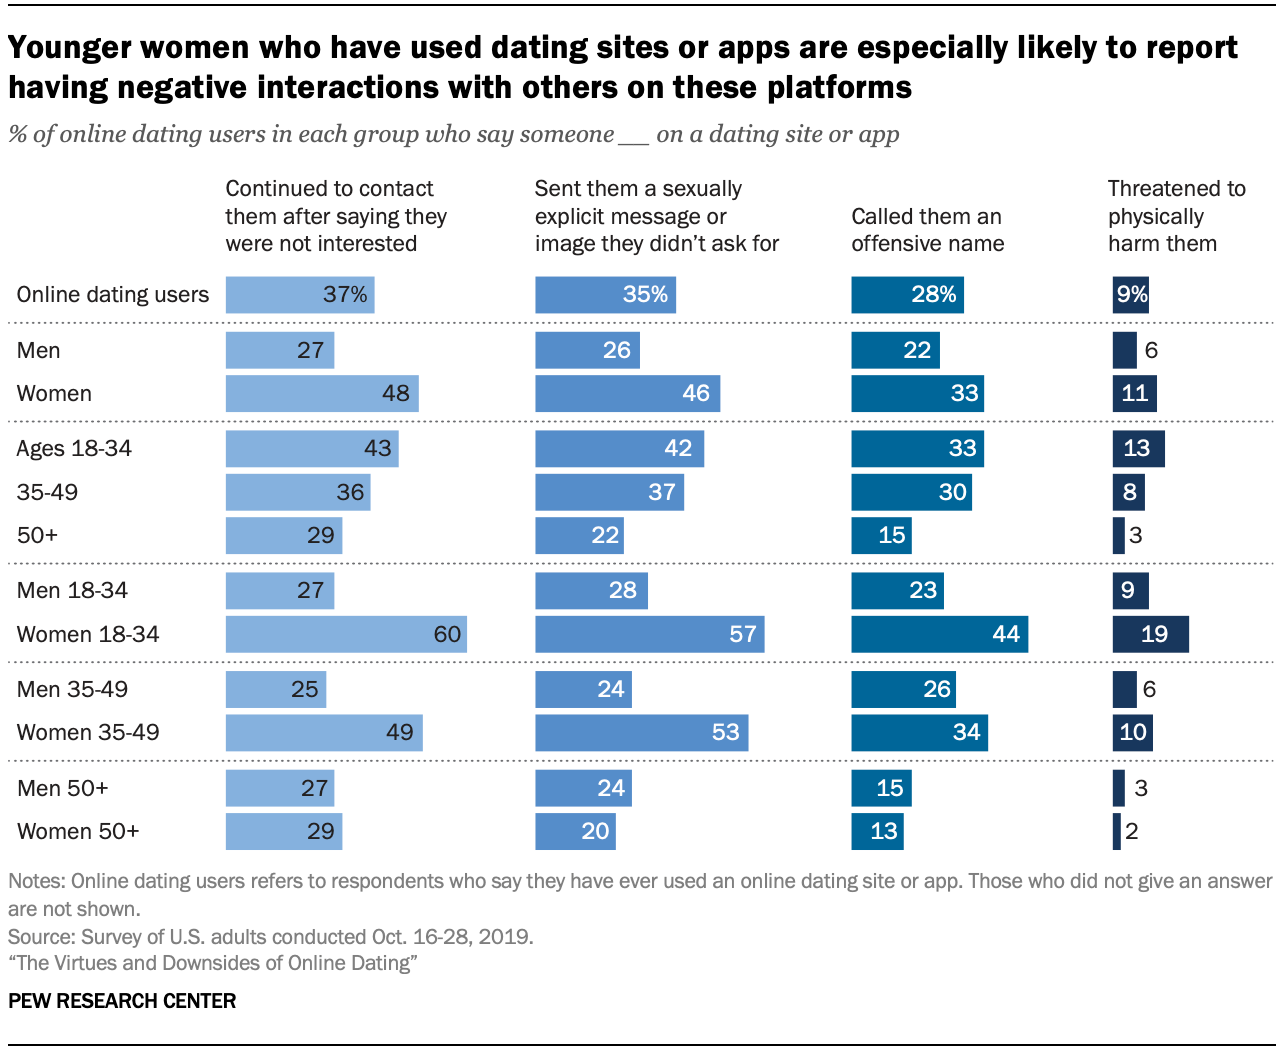 Younger women who have used dating sites or apps are especially likely to report having negative interactions with others on these platforms